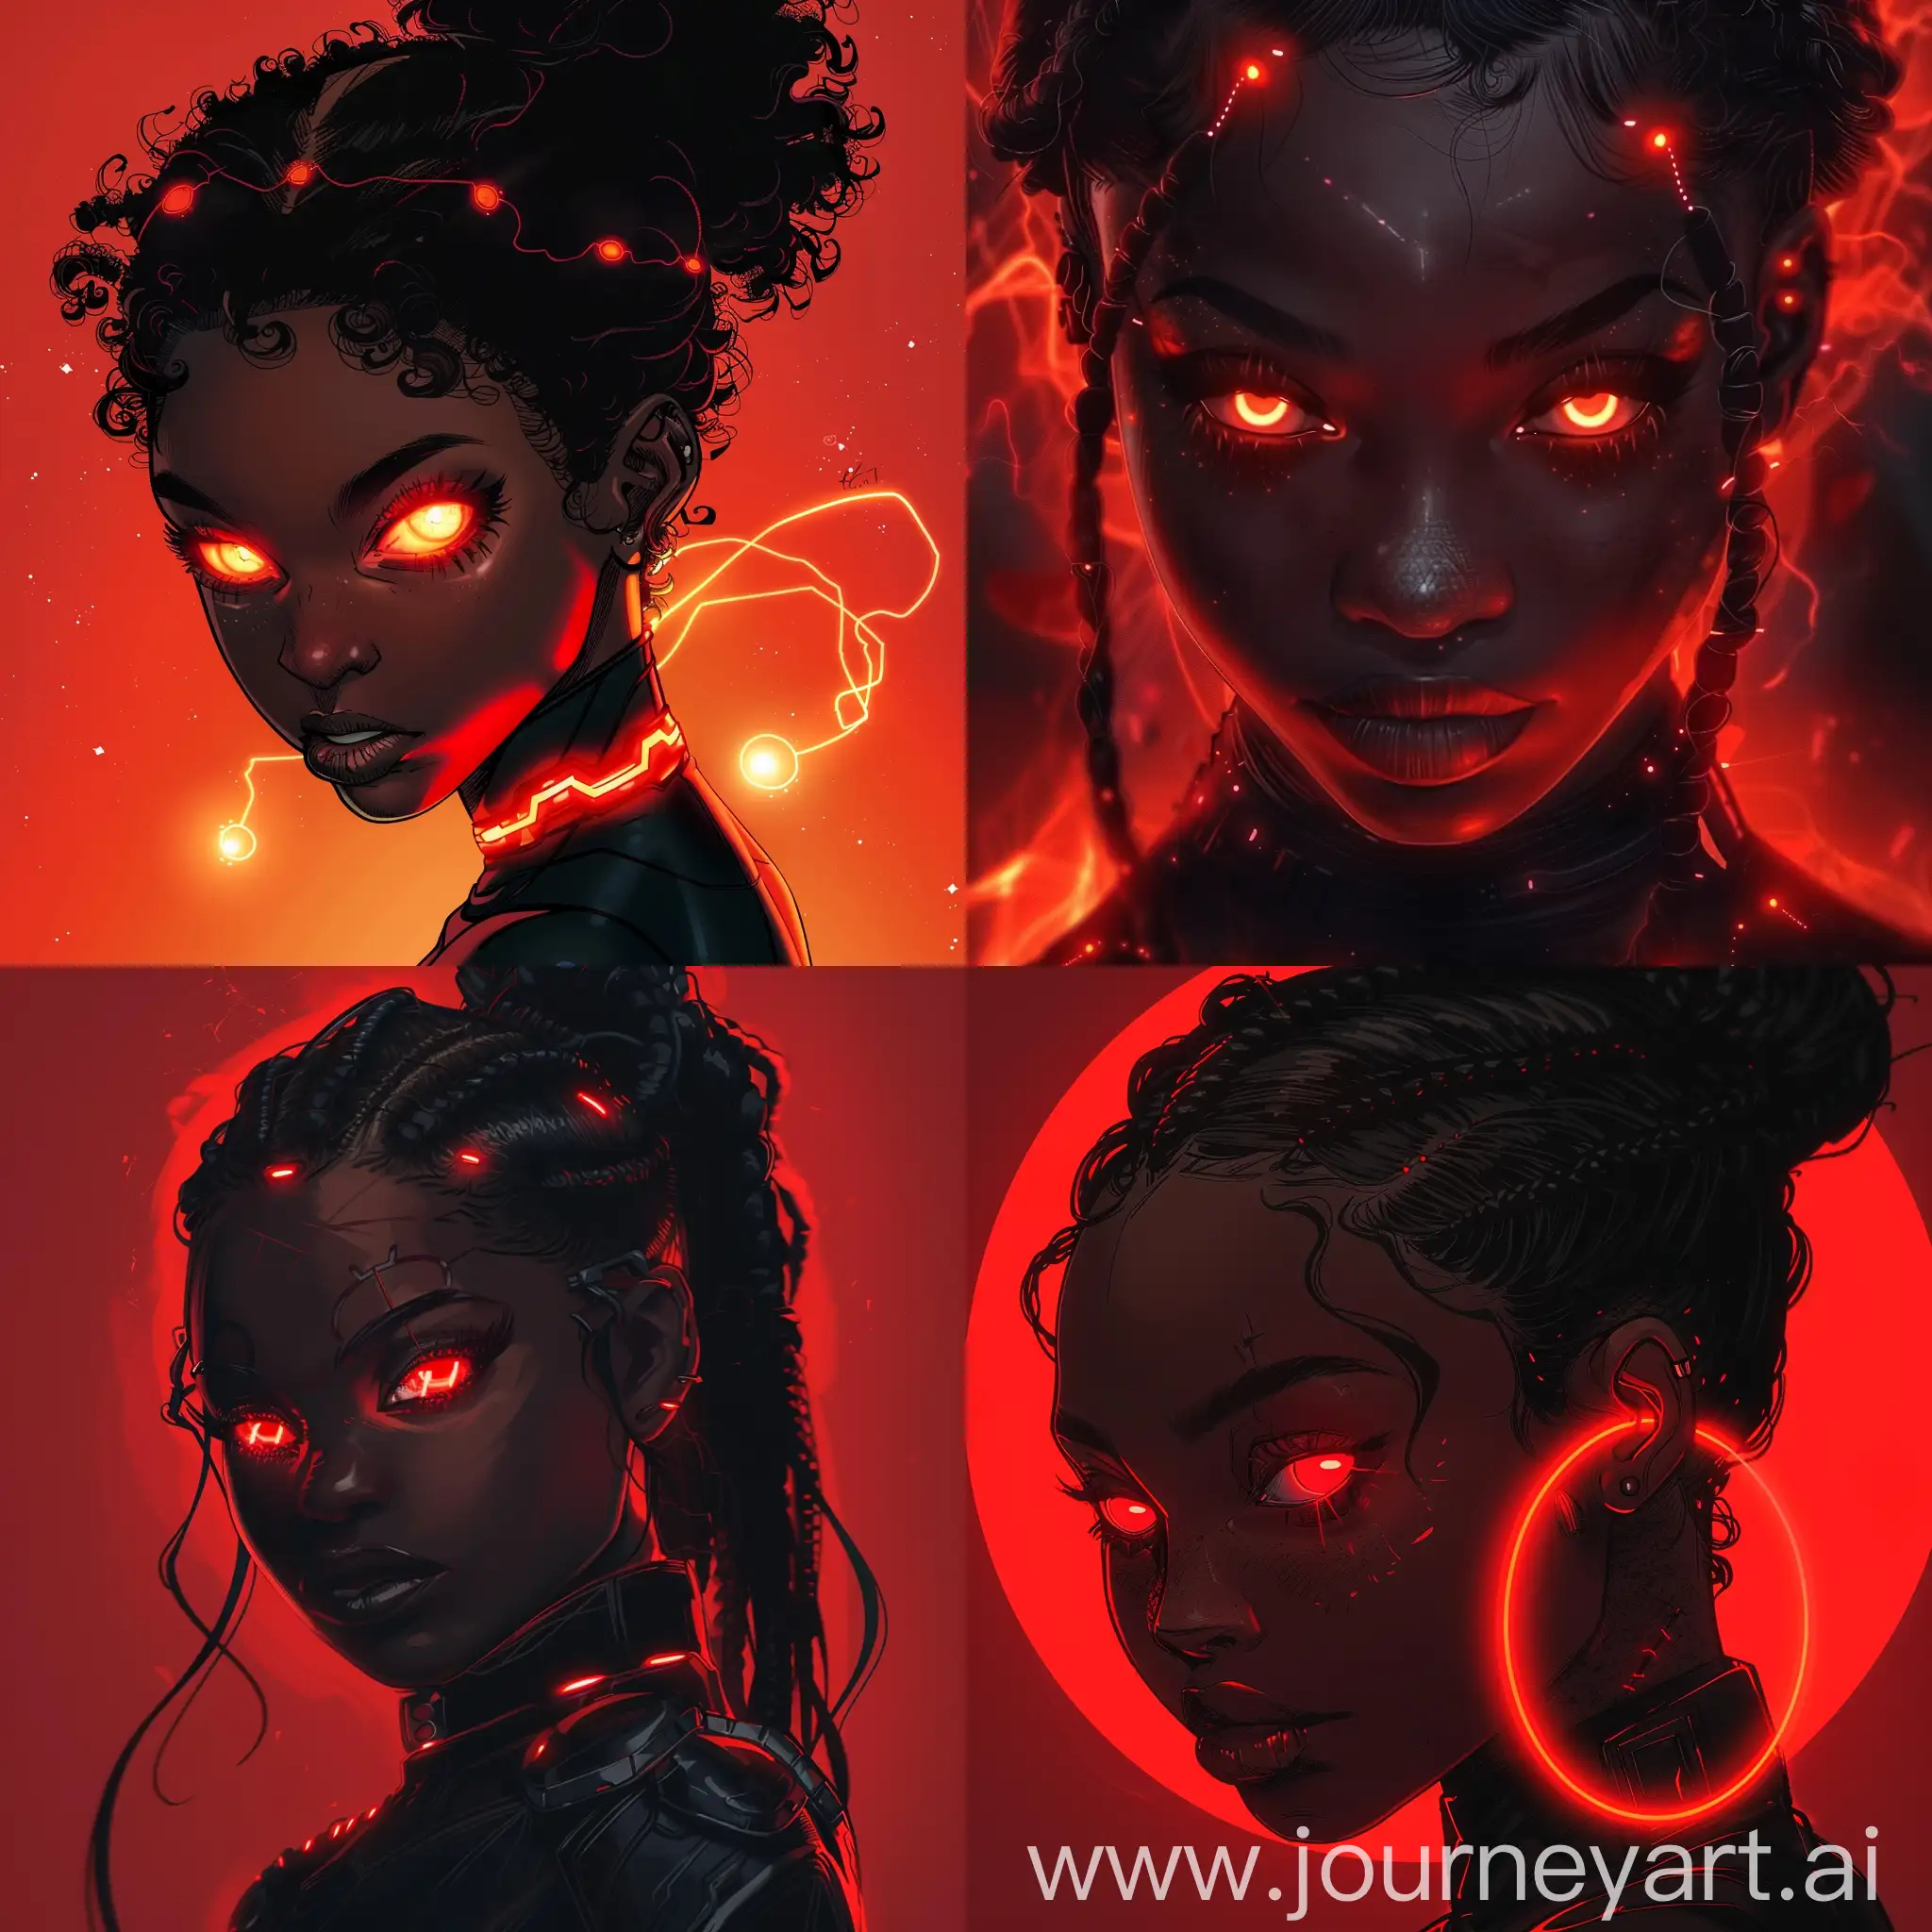 Enchanting-Black-Girl-with-Glowy-Red-Eyes-in-Marvel-Comic-Art-Style